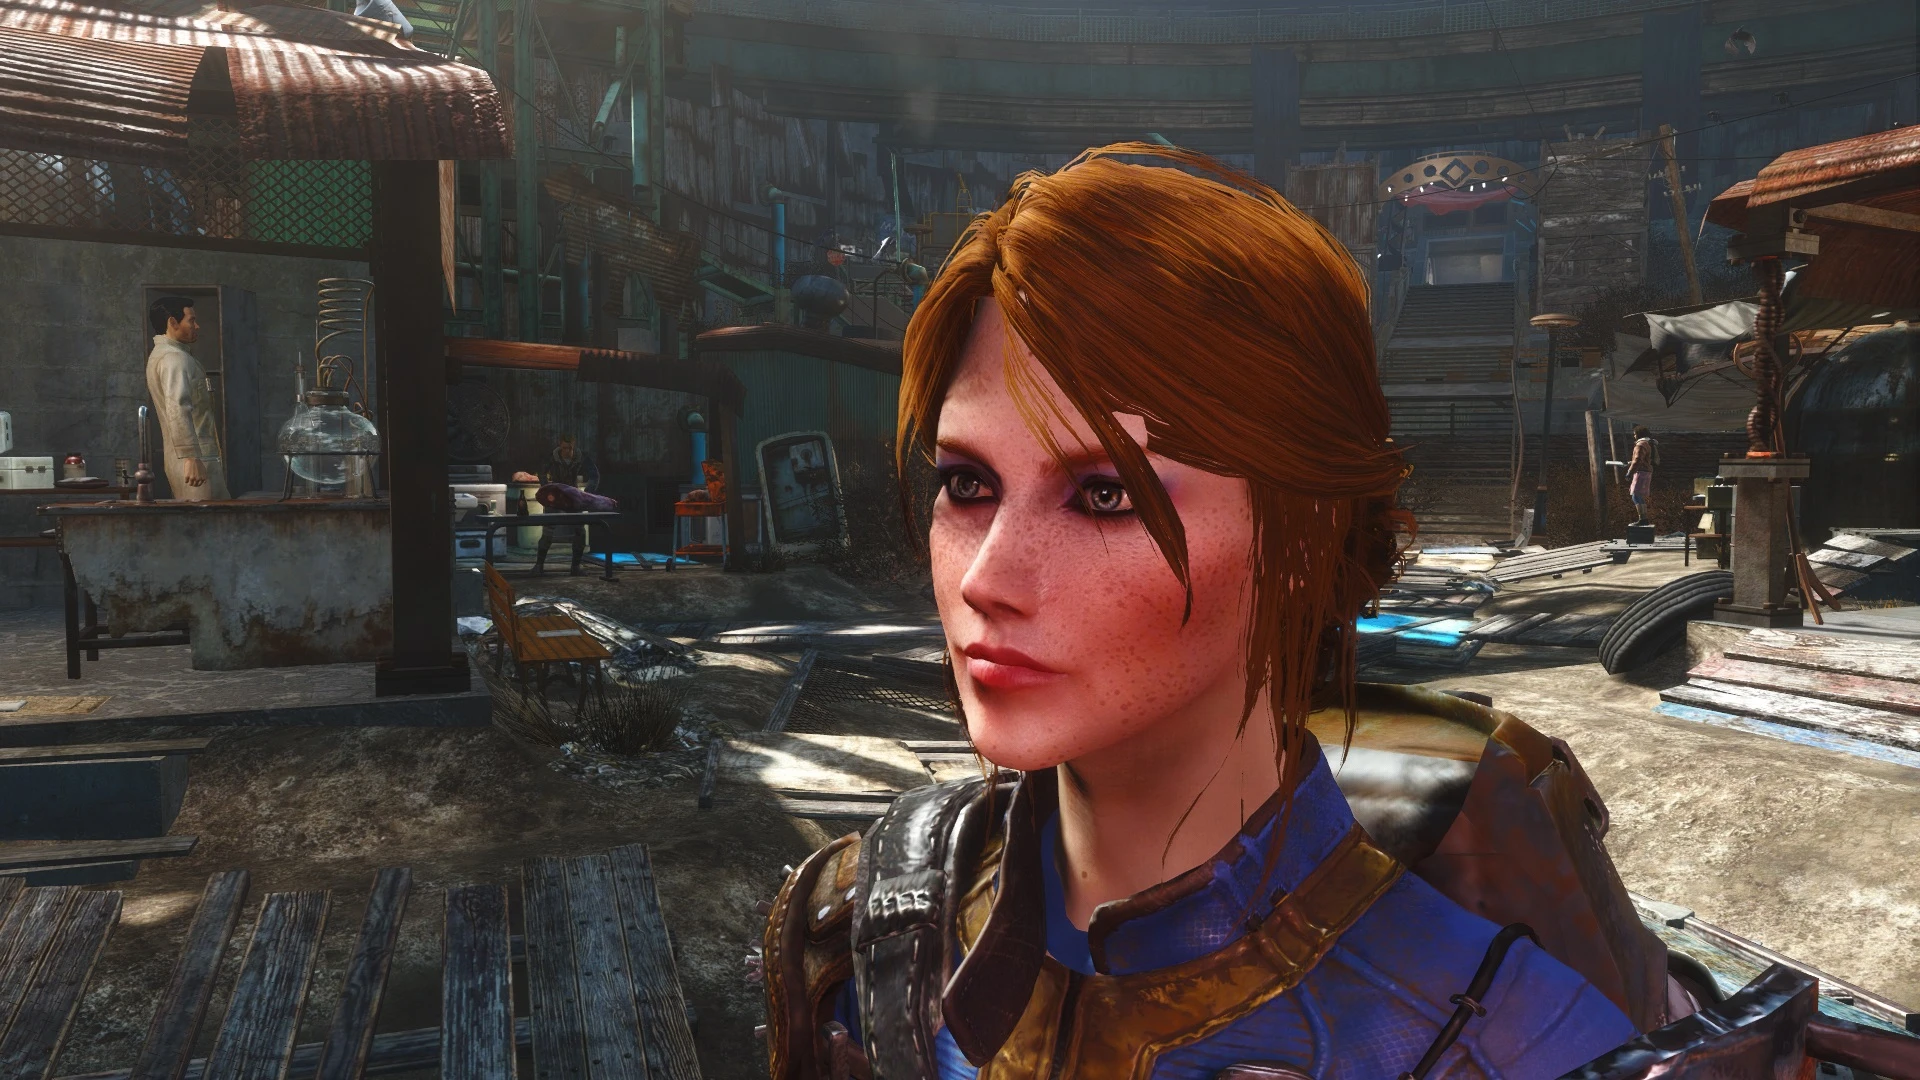 Lovely Redhead - Face Preset and LooksMenu Preset at Fallout 4 Nexus ...